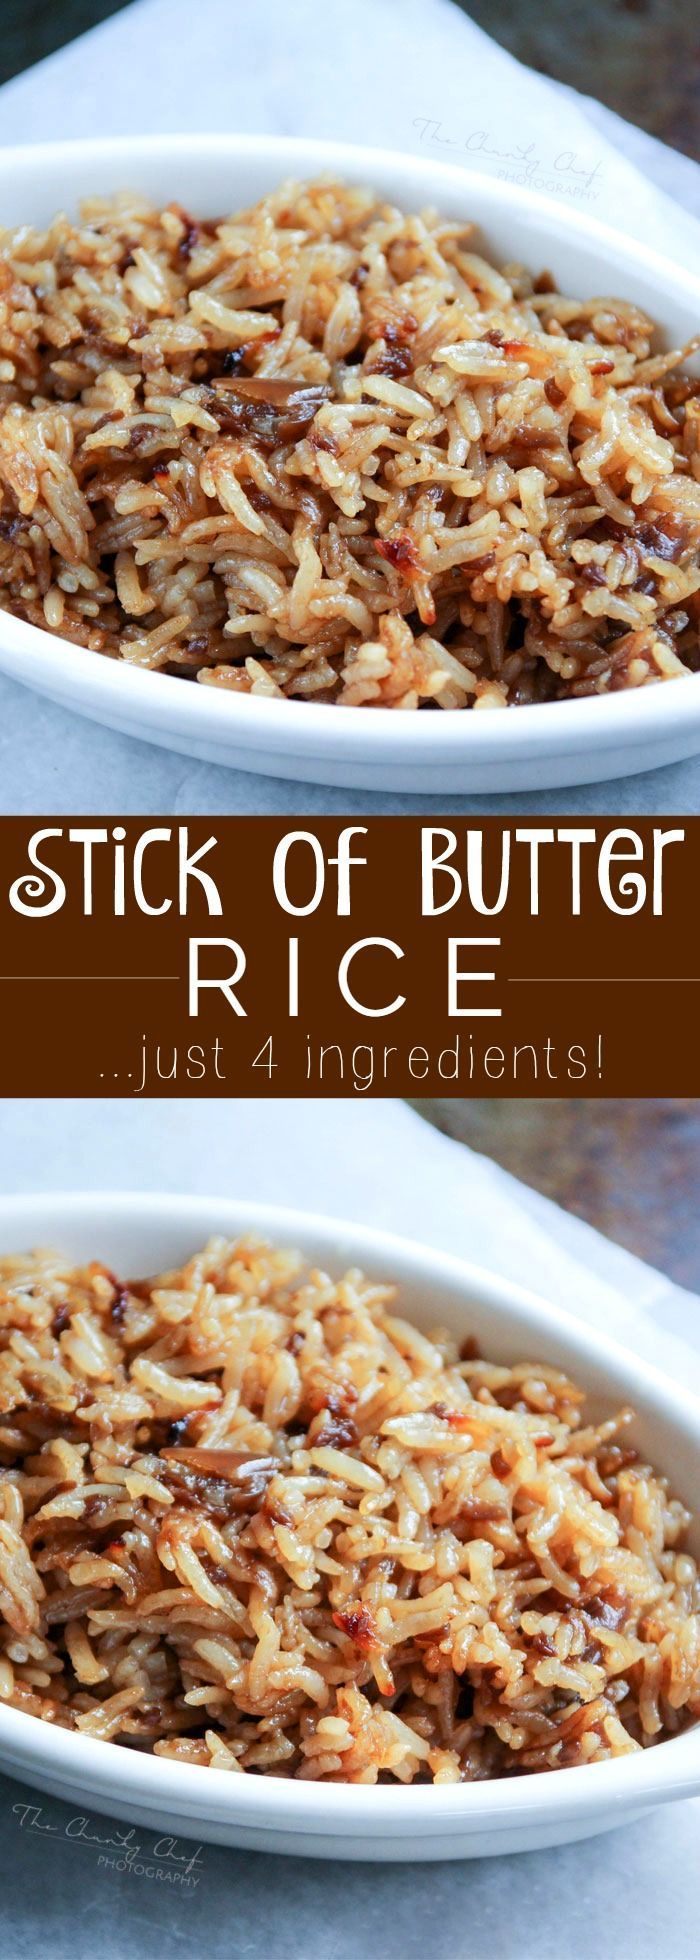 Stick of Butter Rice | Just 4 simple, pantry staple ingredients make up with rice side dish that will blow your mind! Kids and